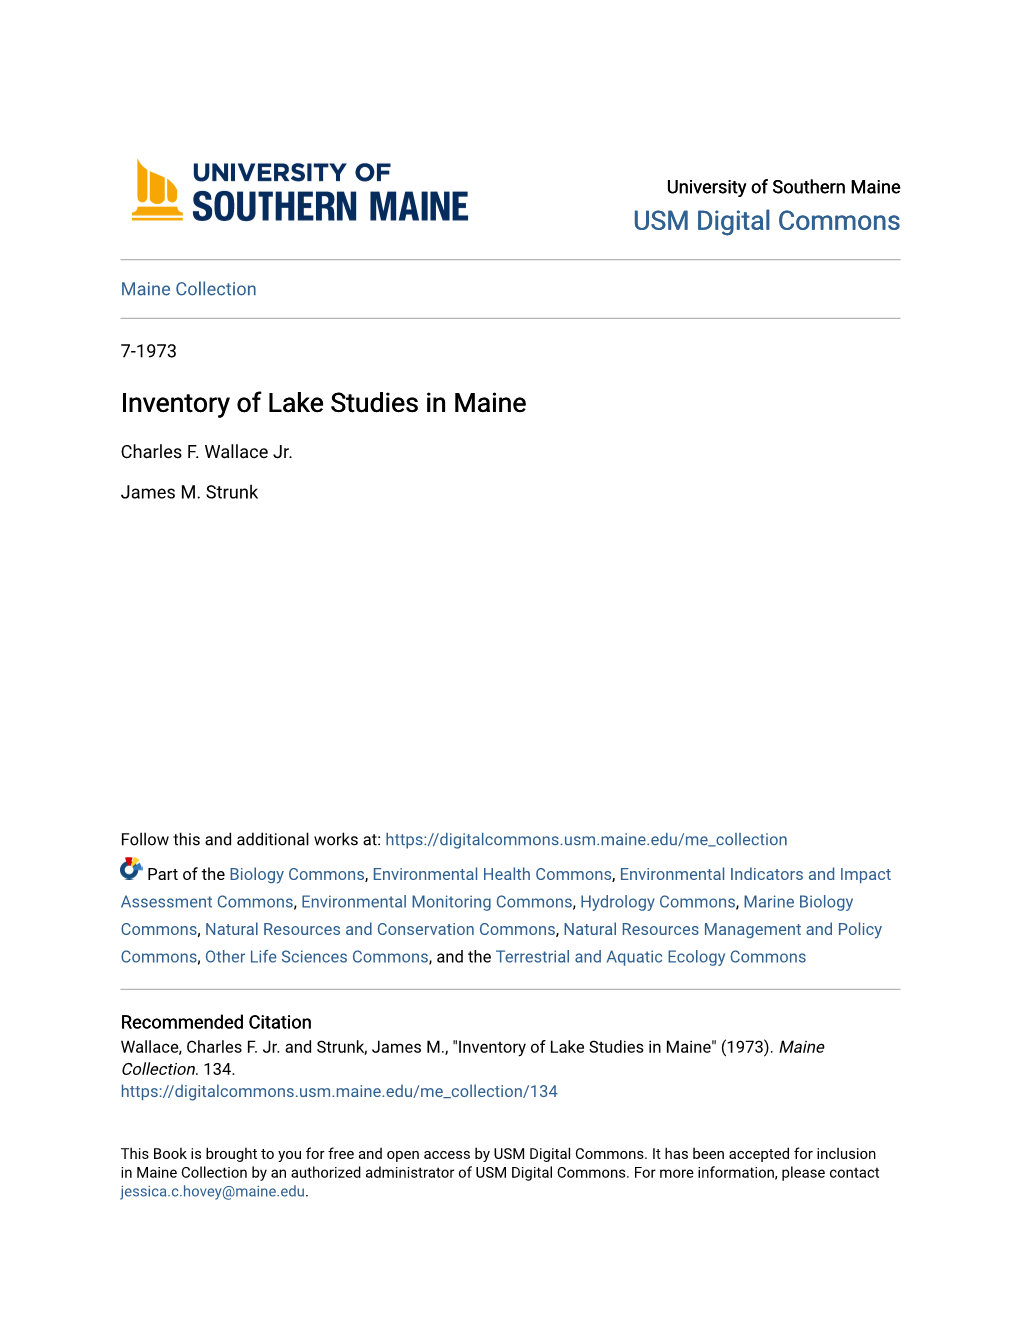 Inventory of Lake Studies in Maine